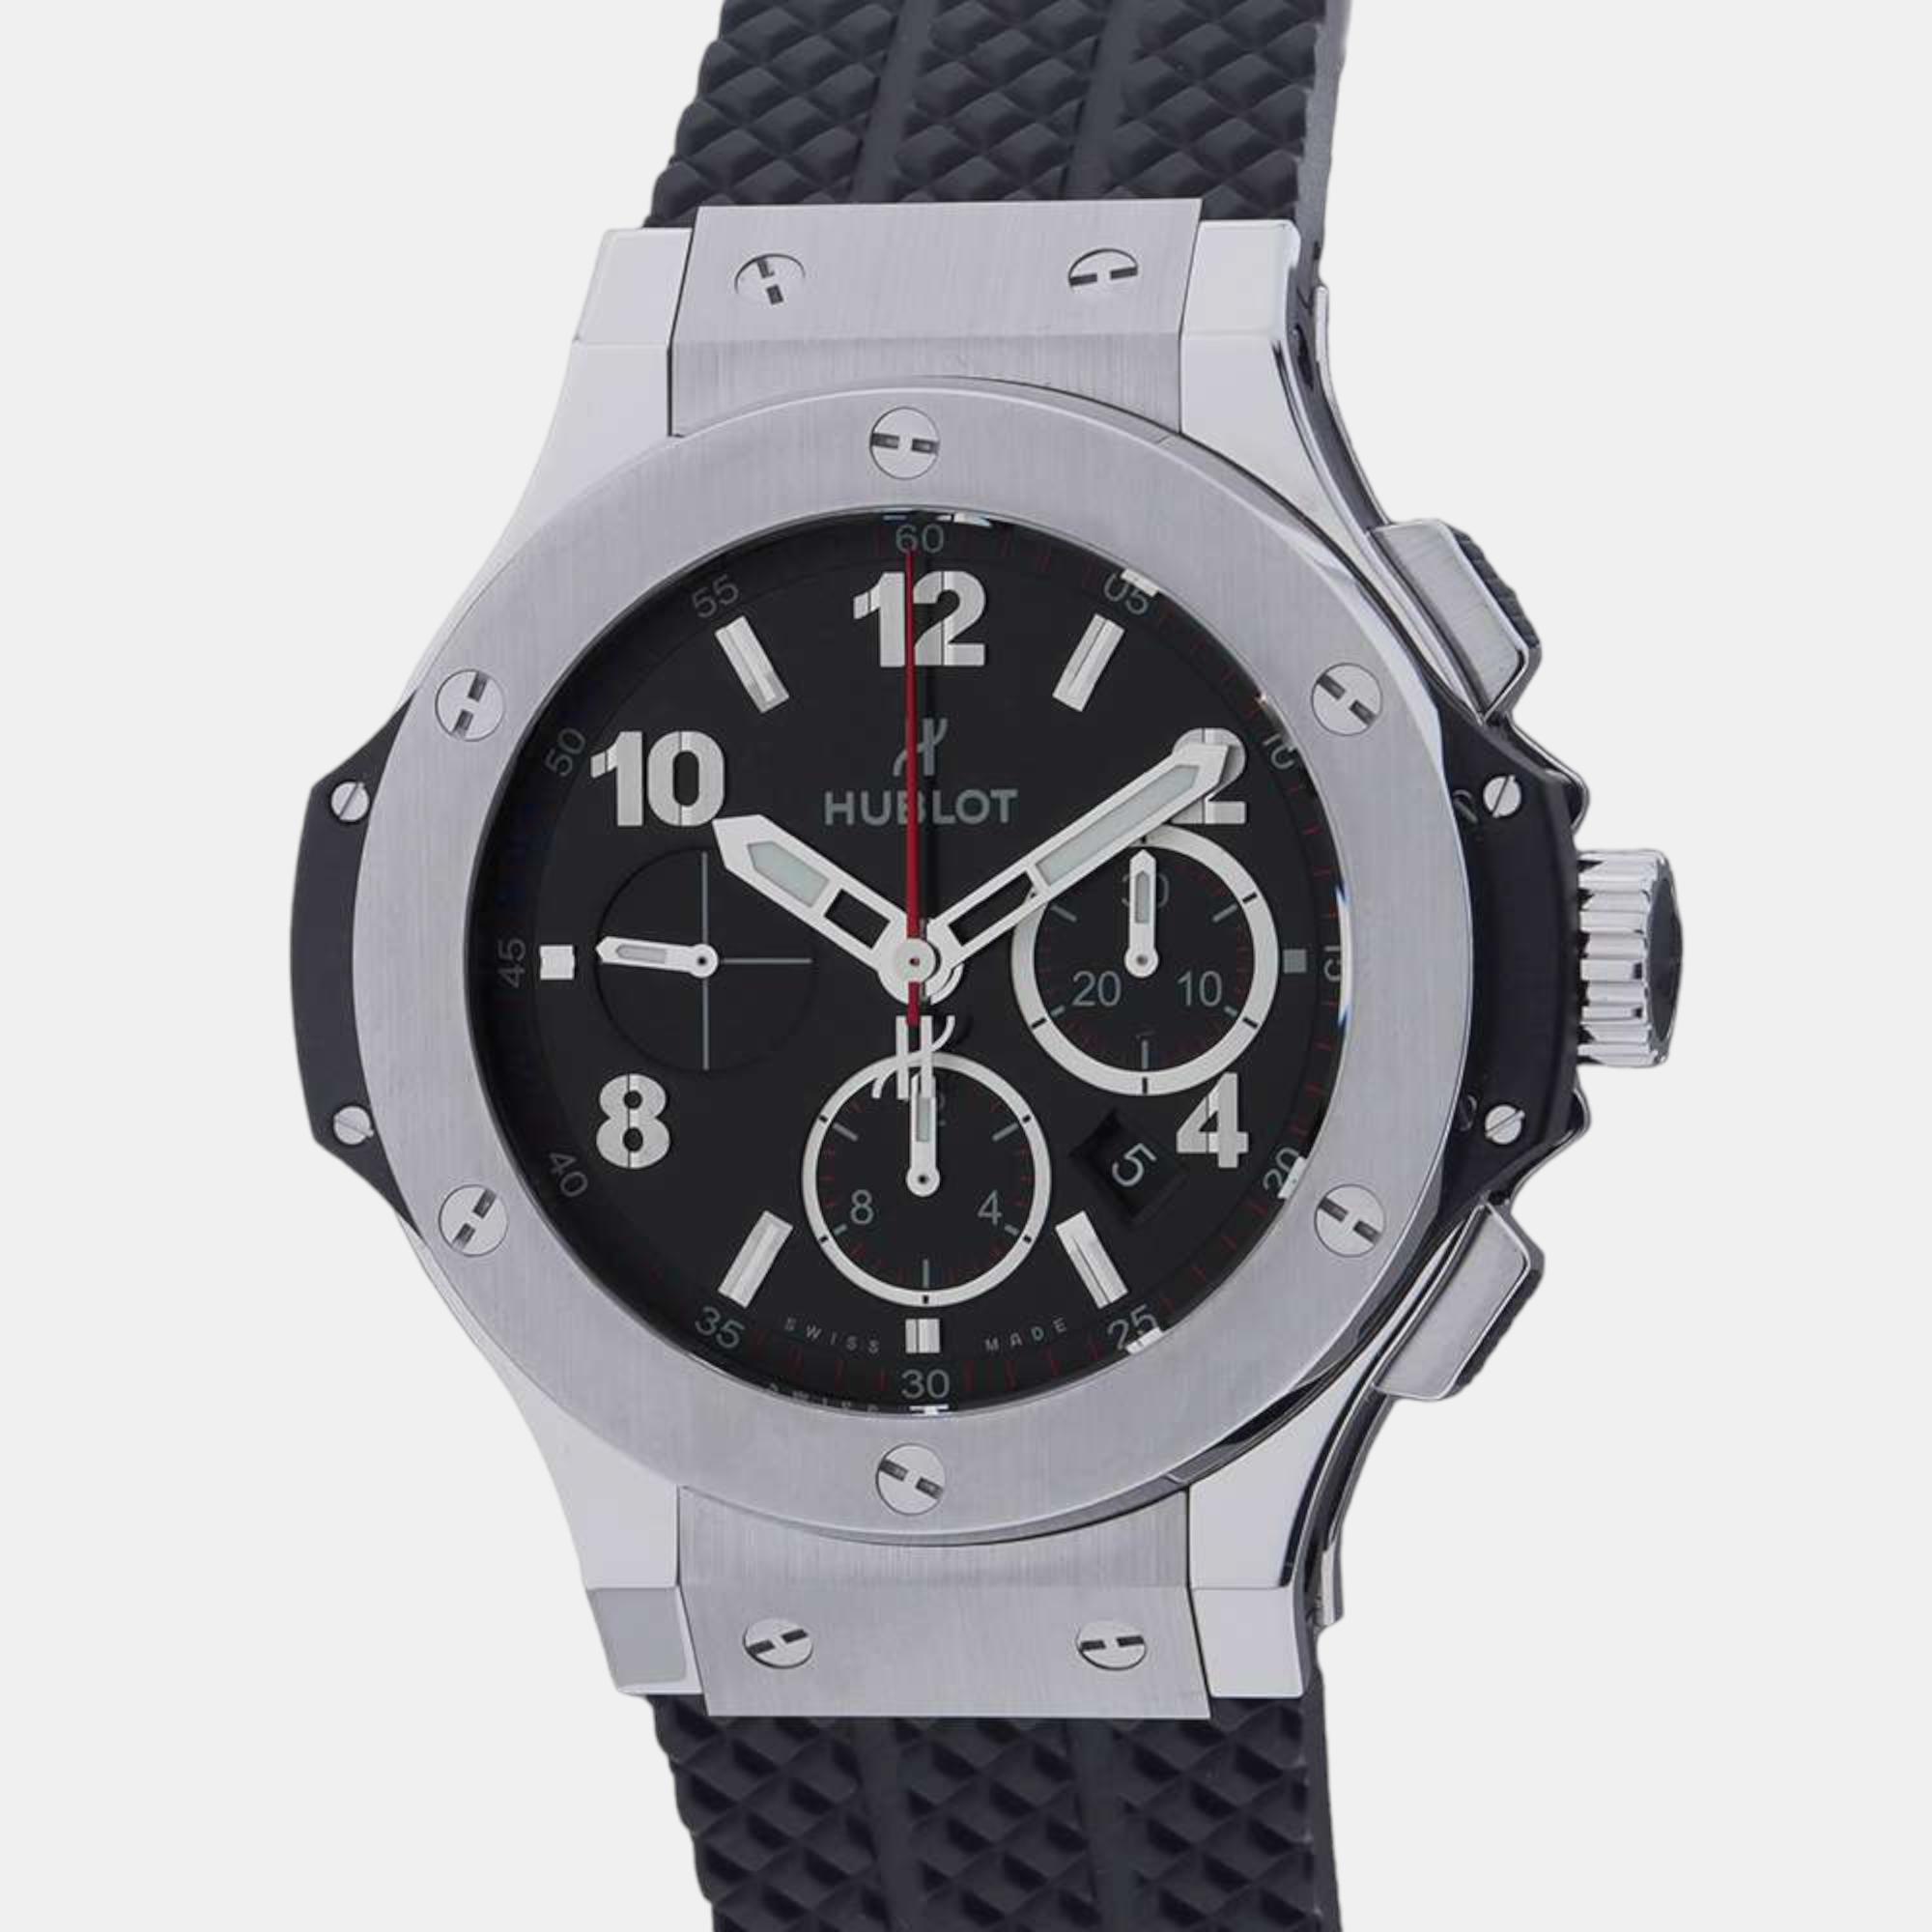 Pre-owned Hublot Black Stainless Steel Big Bang 301.sx.130.rx Automatic Men's Wristwatch 44 Mm